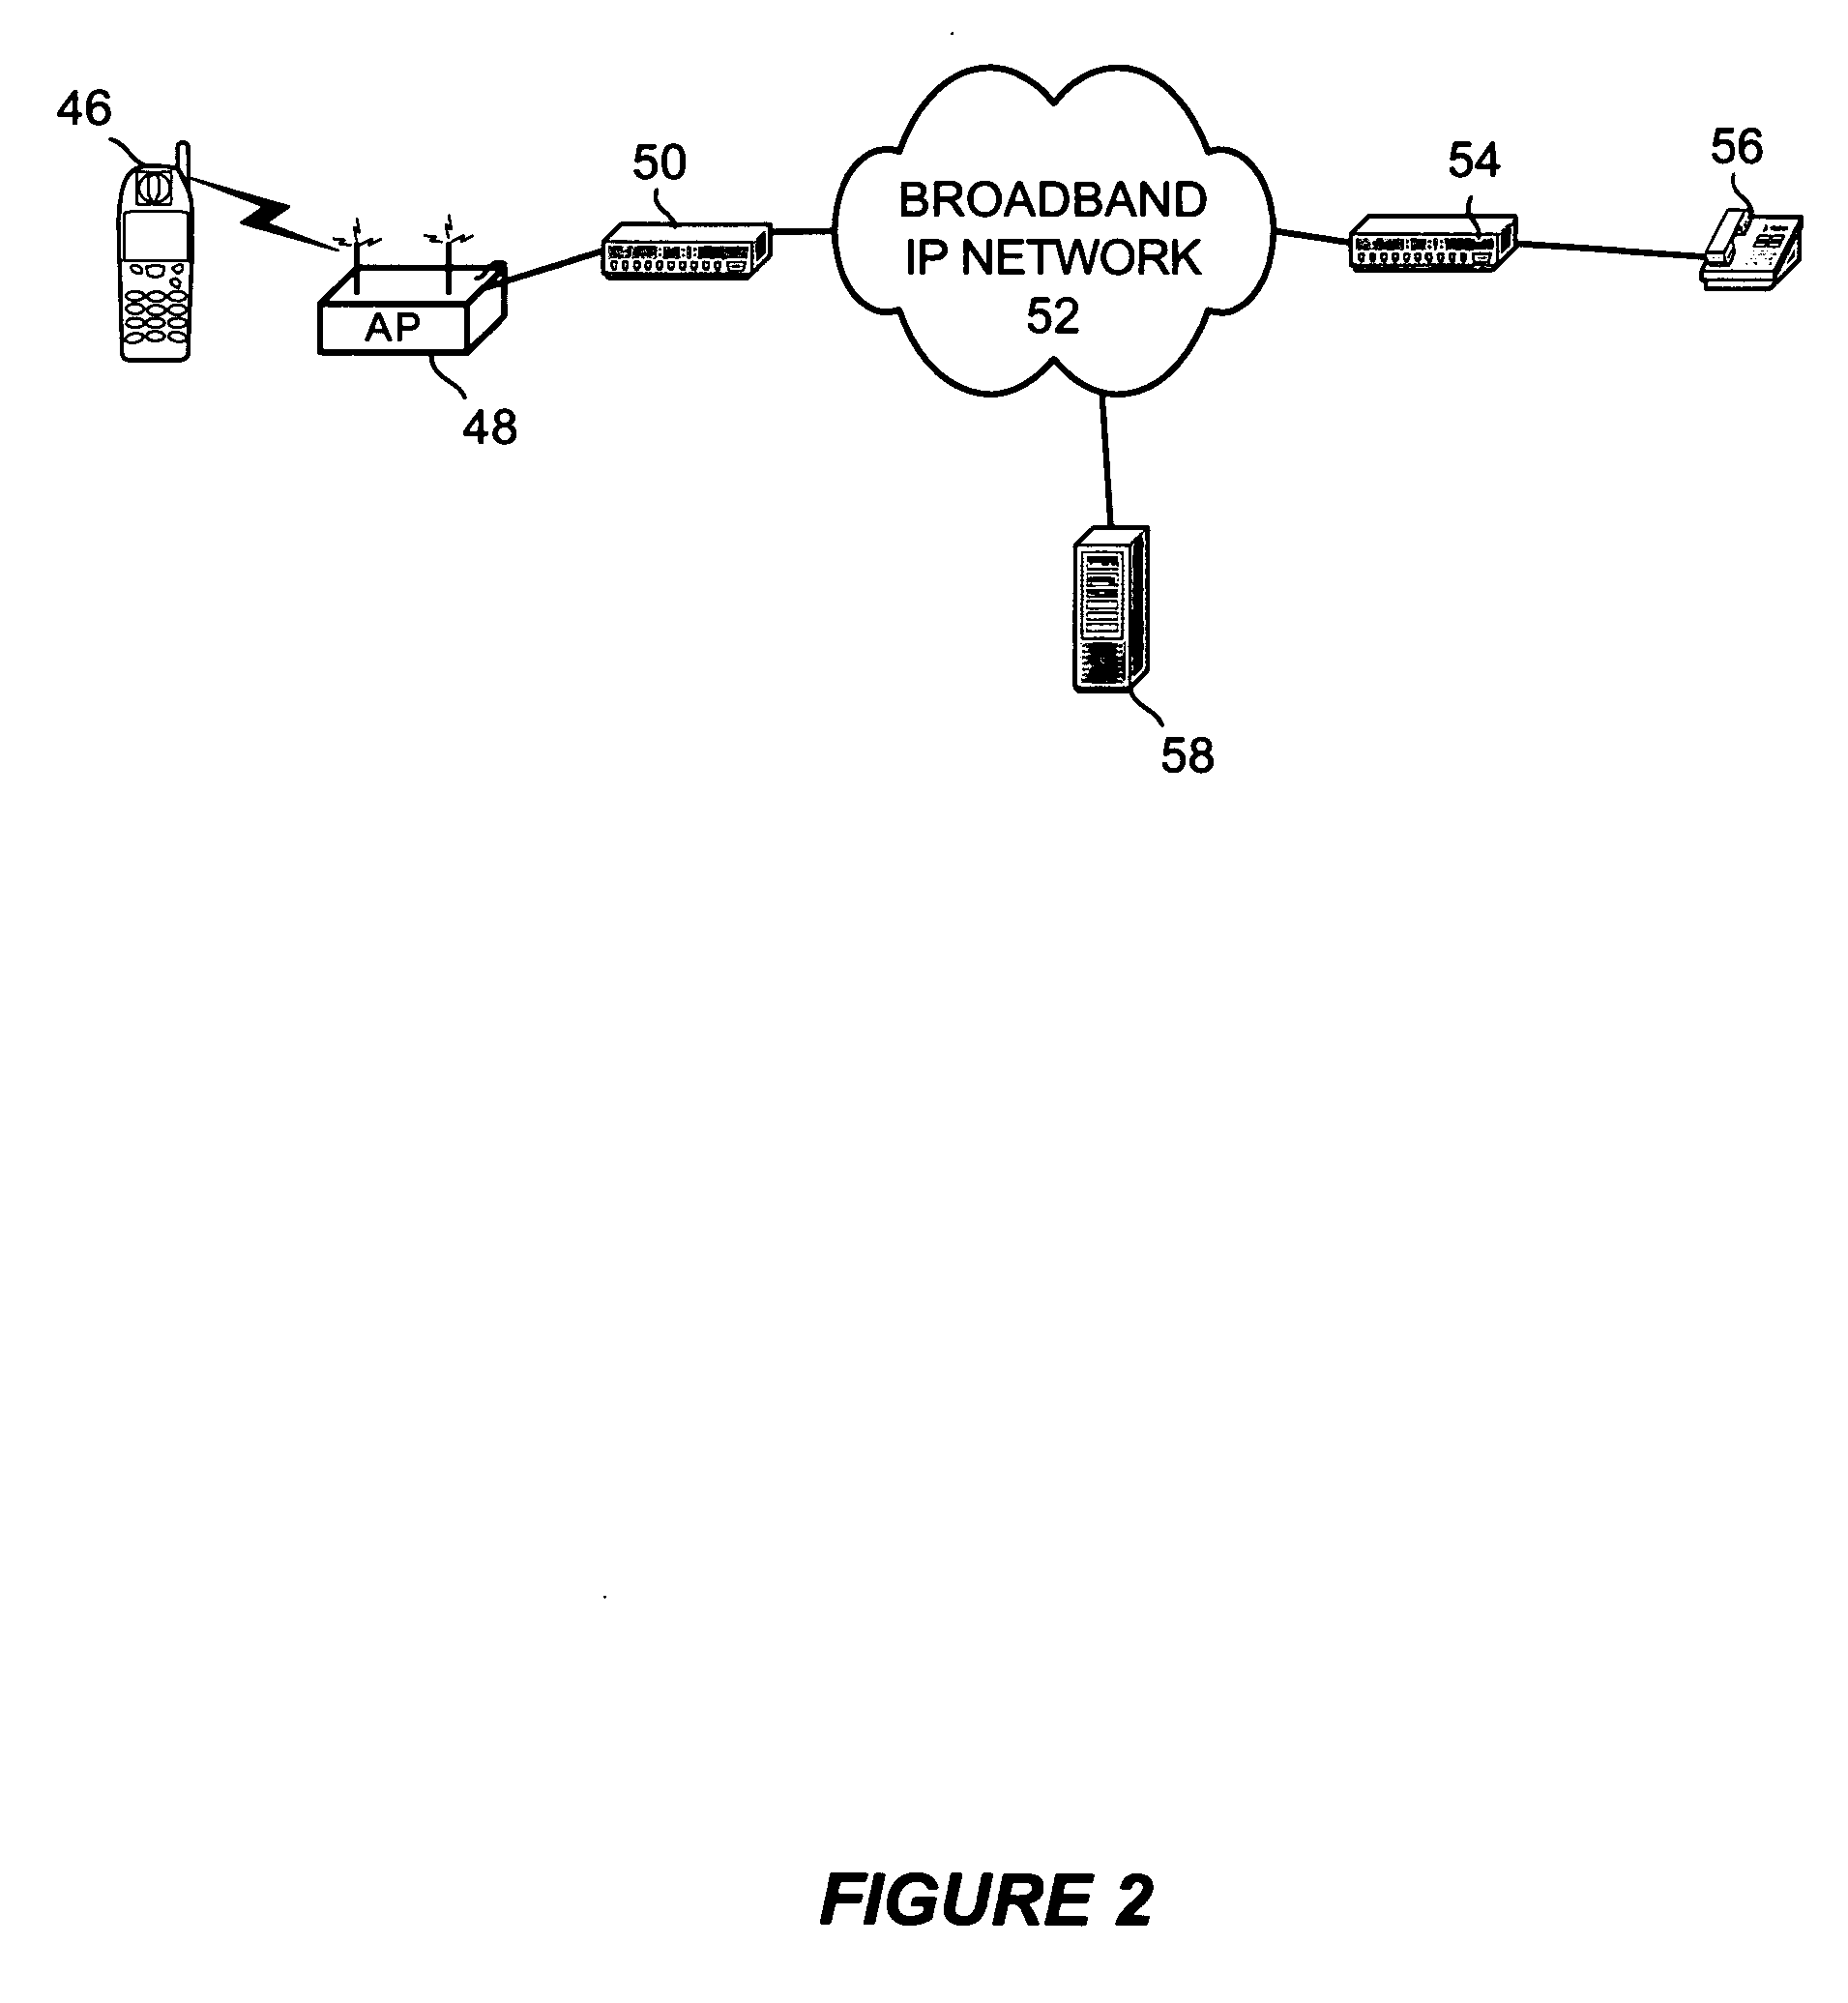 Delivery of video or voice mail messages over a packet network